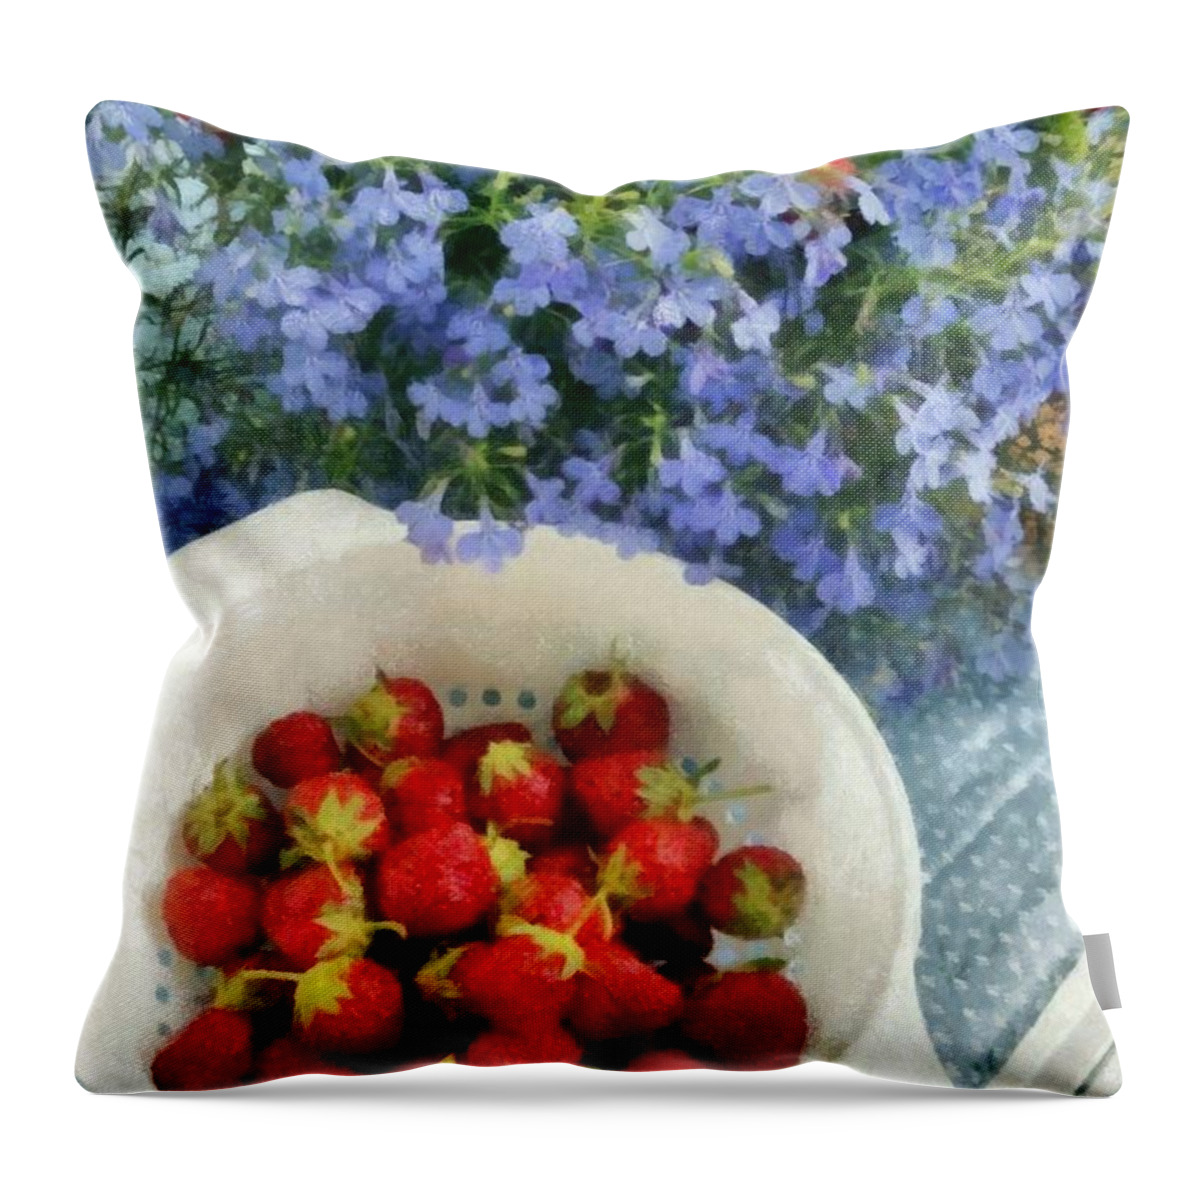 Strawberries Throw Pillow featuring the photograph Summertime Table by Michelle Calkins